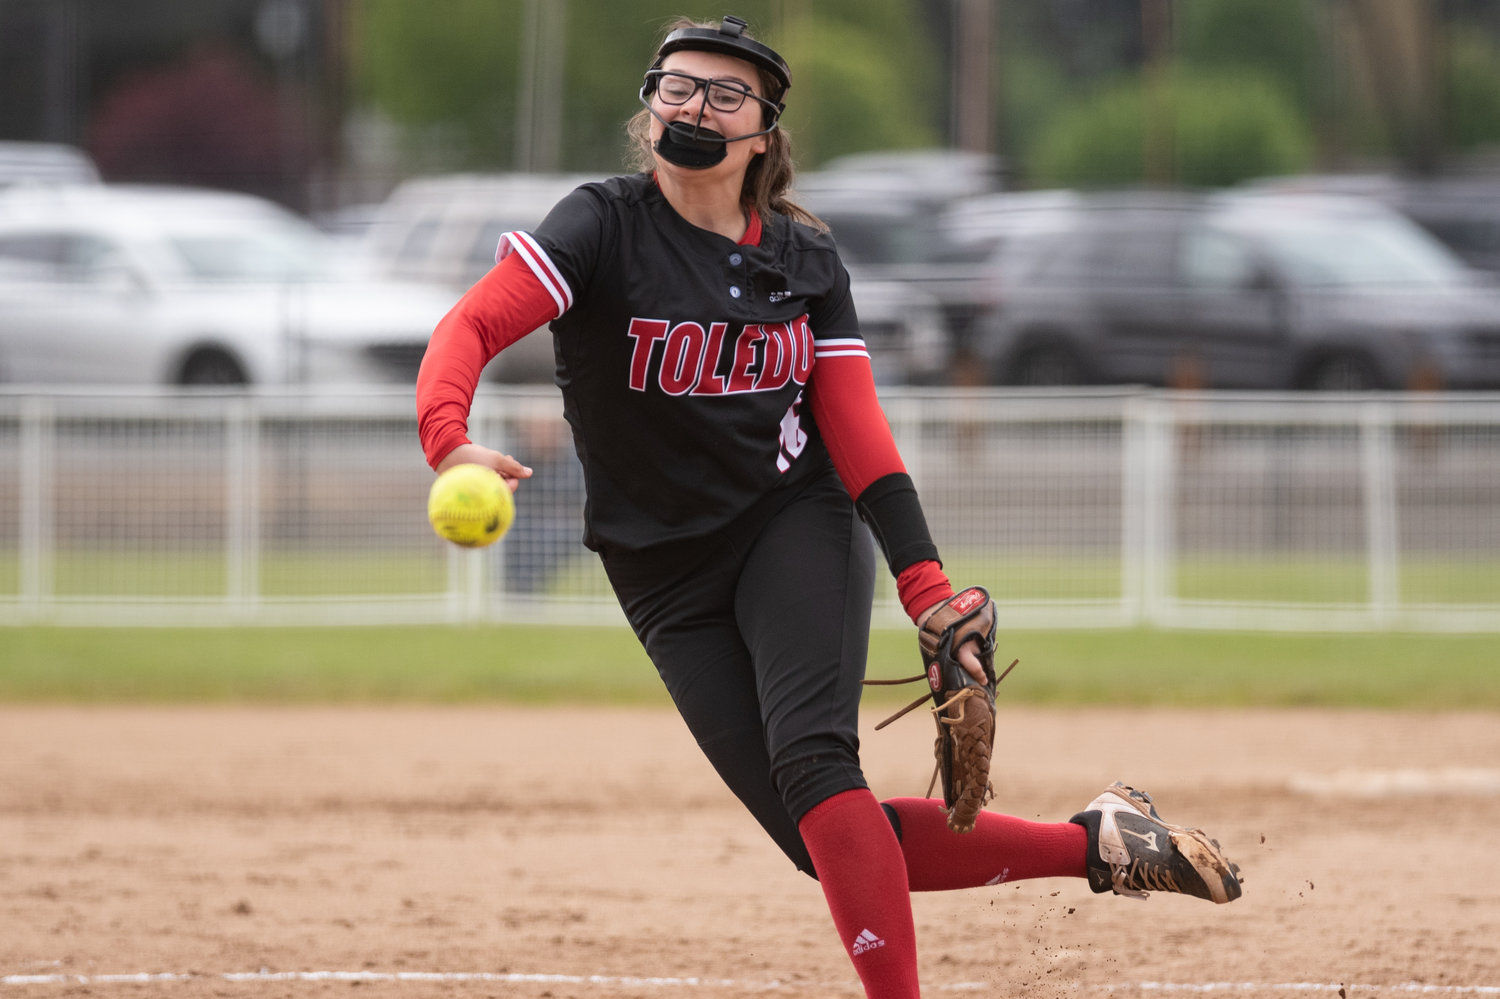 Toledo pitcher Bethany Bowen releases a pitch against PWV in the 2B District 4 tournament at Fort Borst Park May 20.